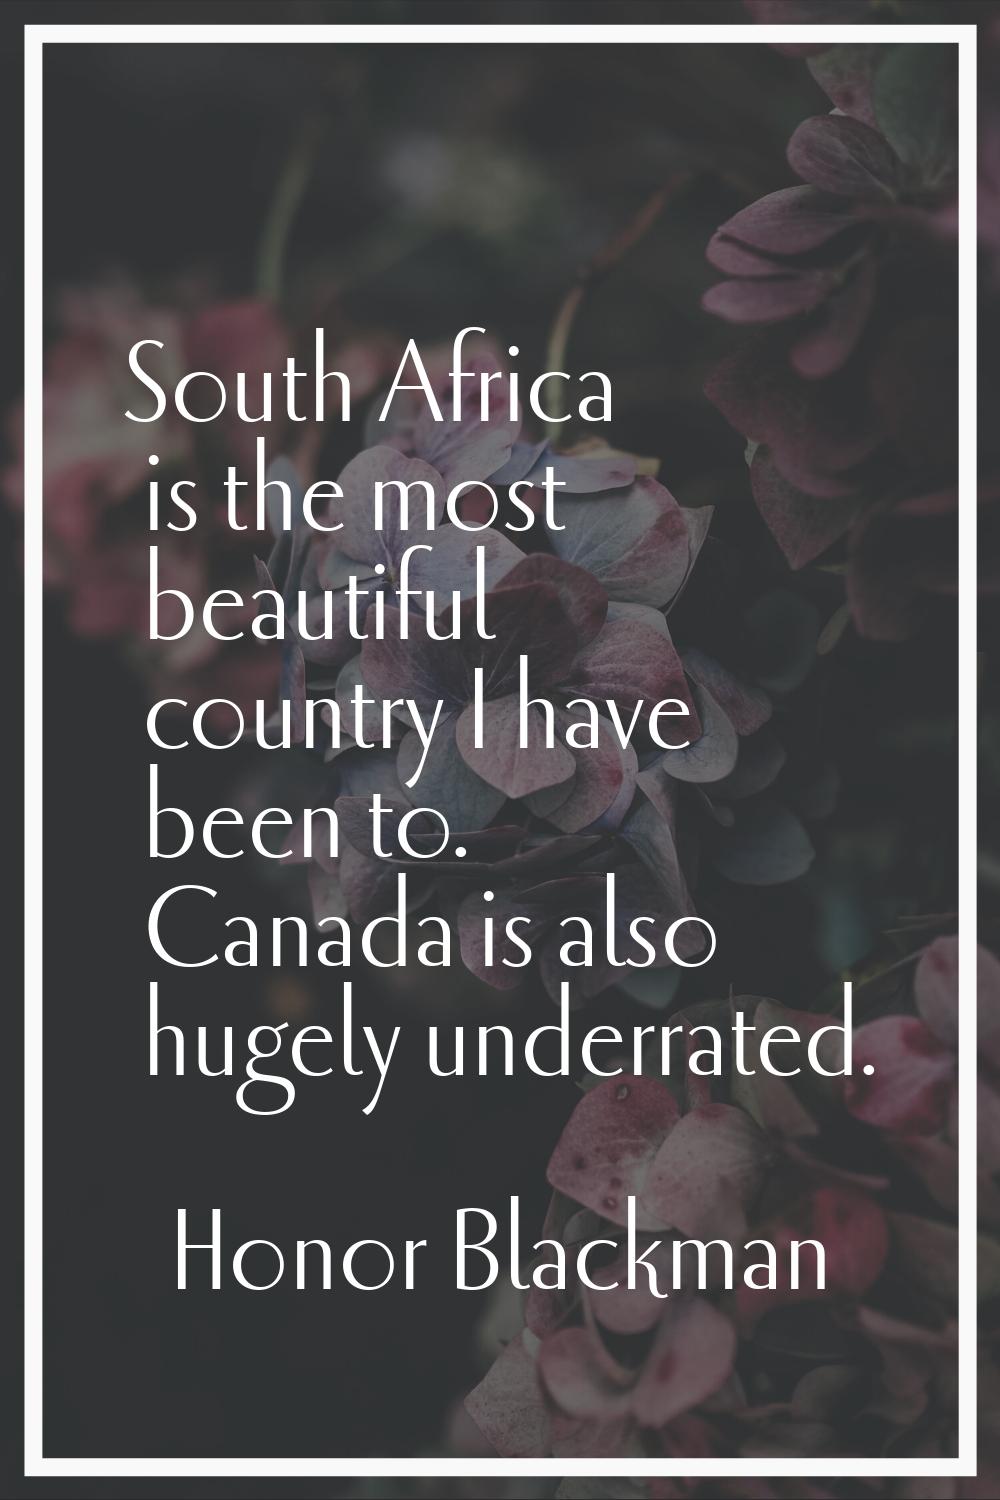 South Africa is the most beautiful country I have been to. Canada is also hugely underrated.